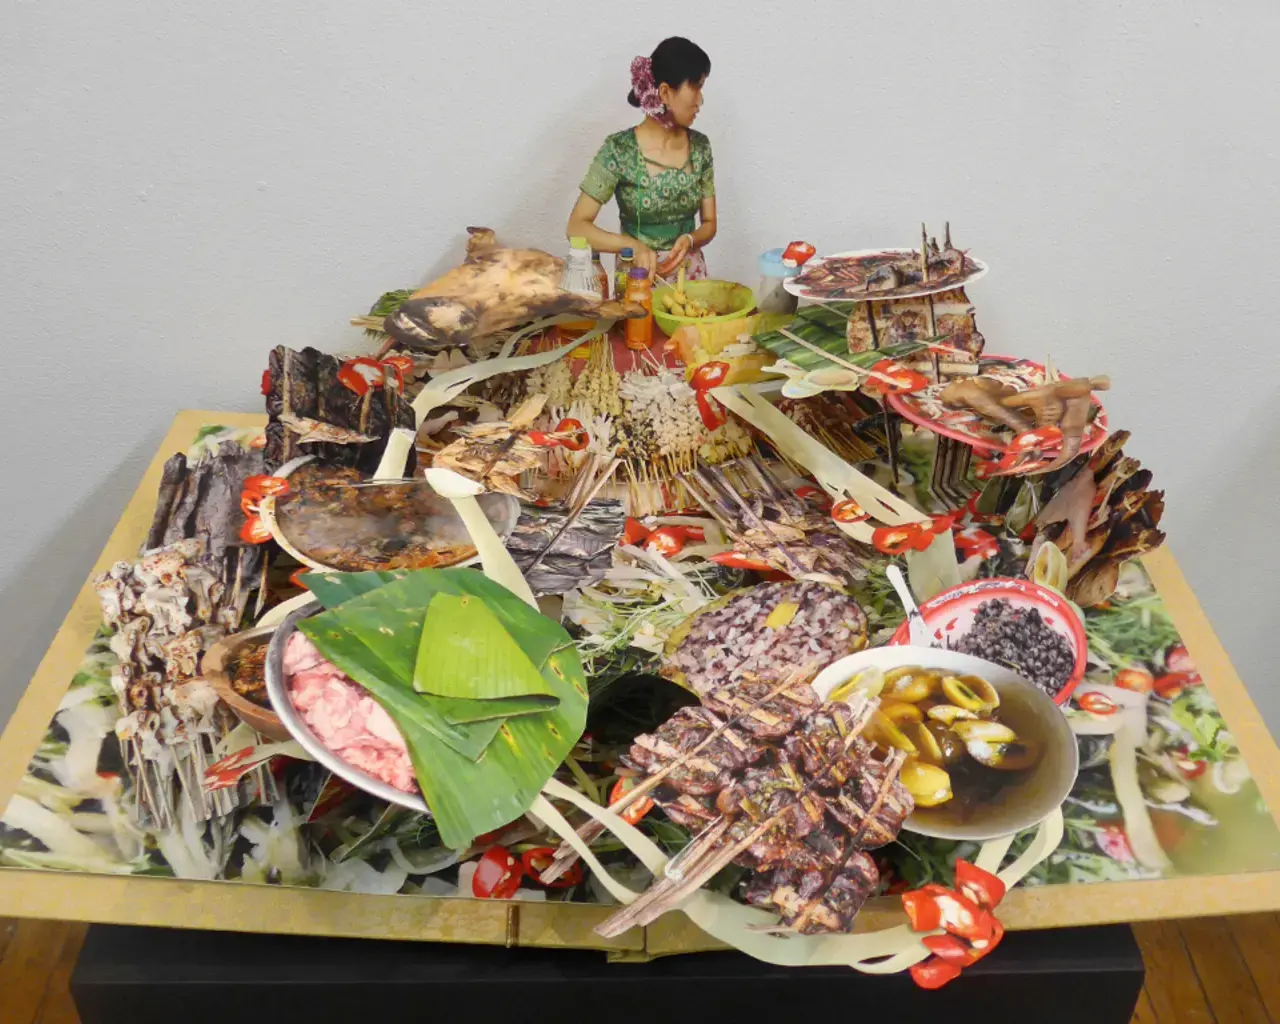 Colette Fu, Dai Food Pop Up Book, 2013, presented through We Are Tiger Dragon People 我們是虎龍人. Photo courtesy of Asian Arts Initiative.